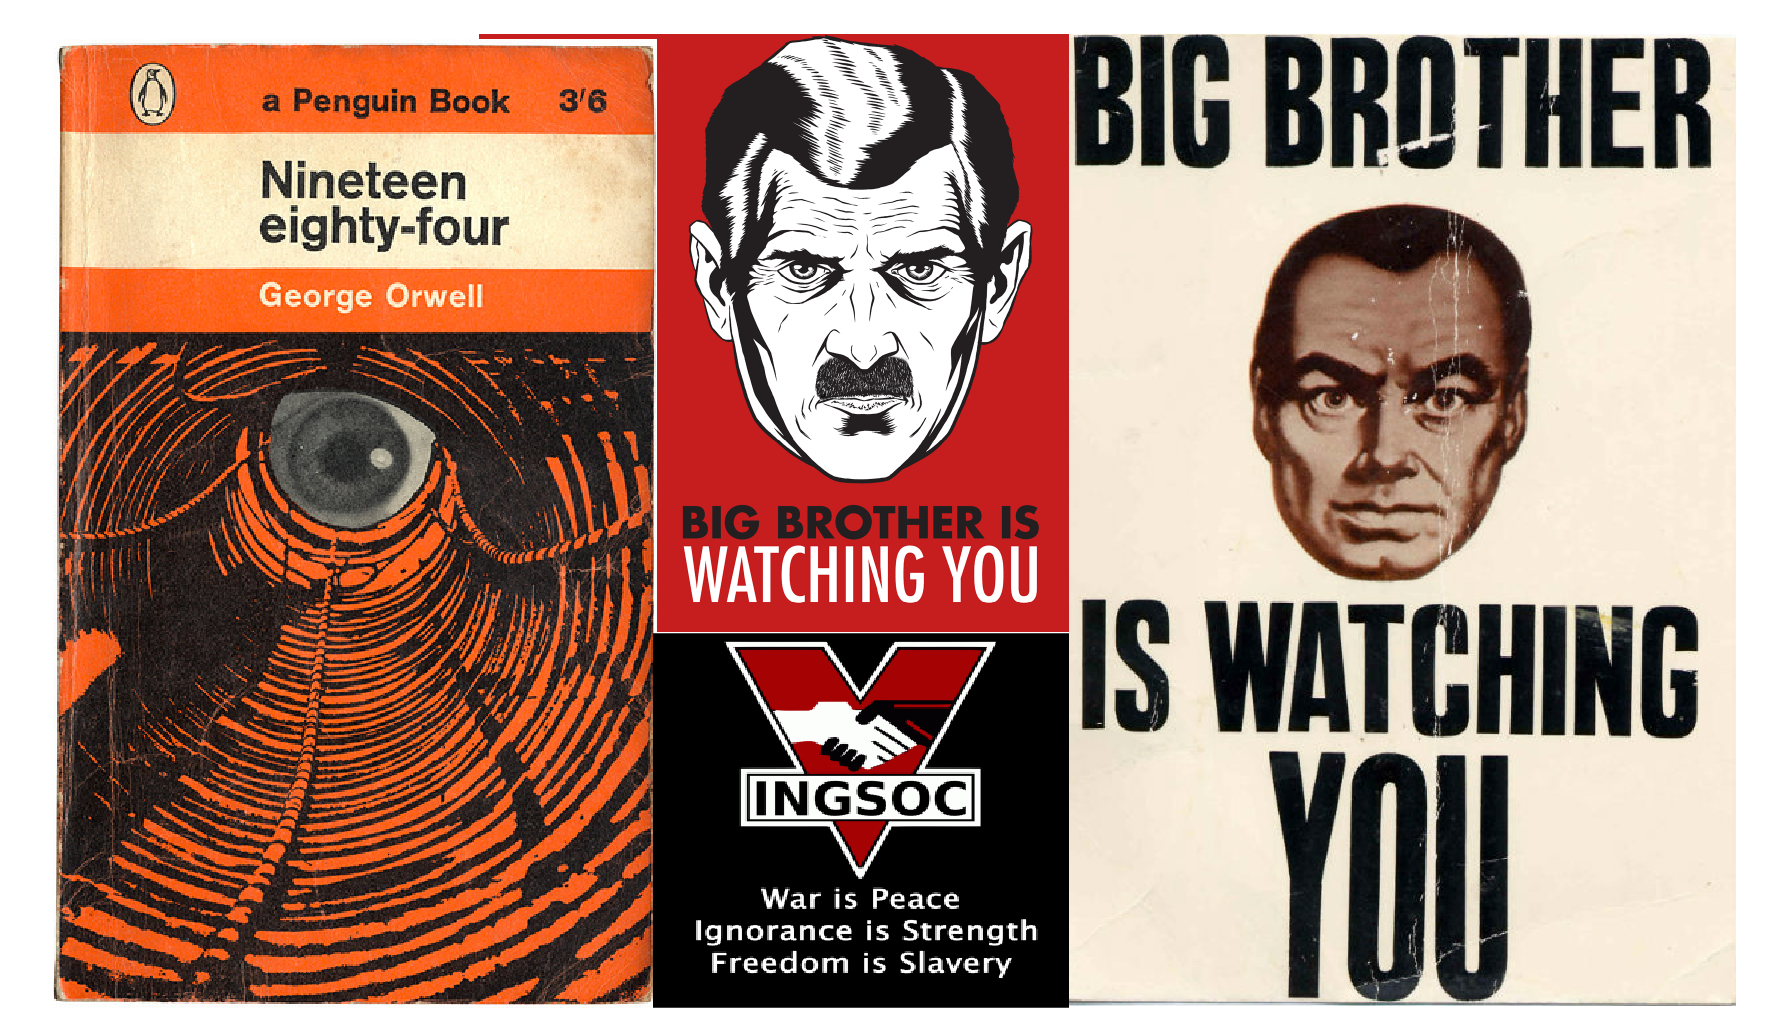 1984 by George Orwell Book Cover on Behance  Book cover art, Book cover  design inspiration, Book cover design